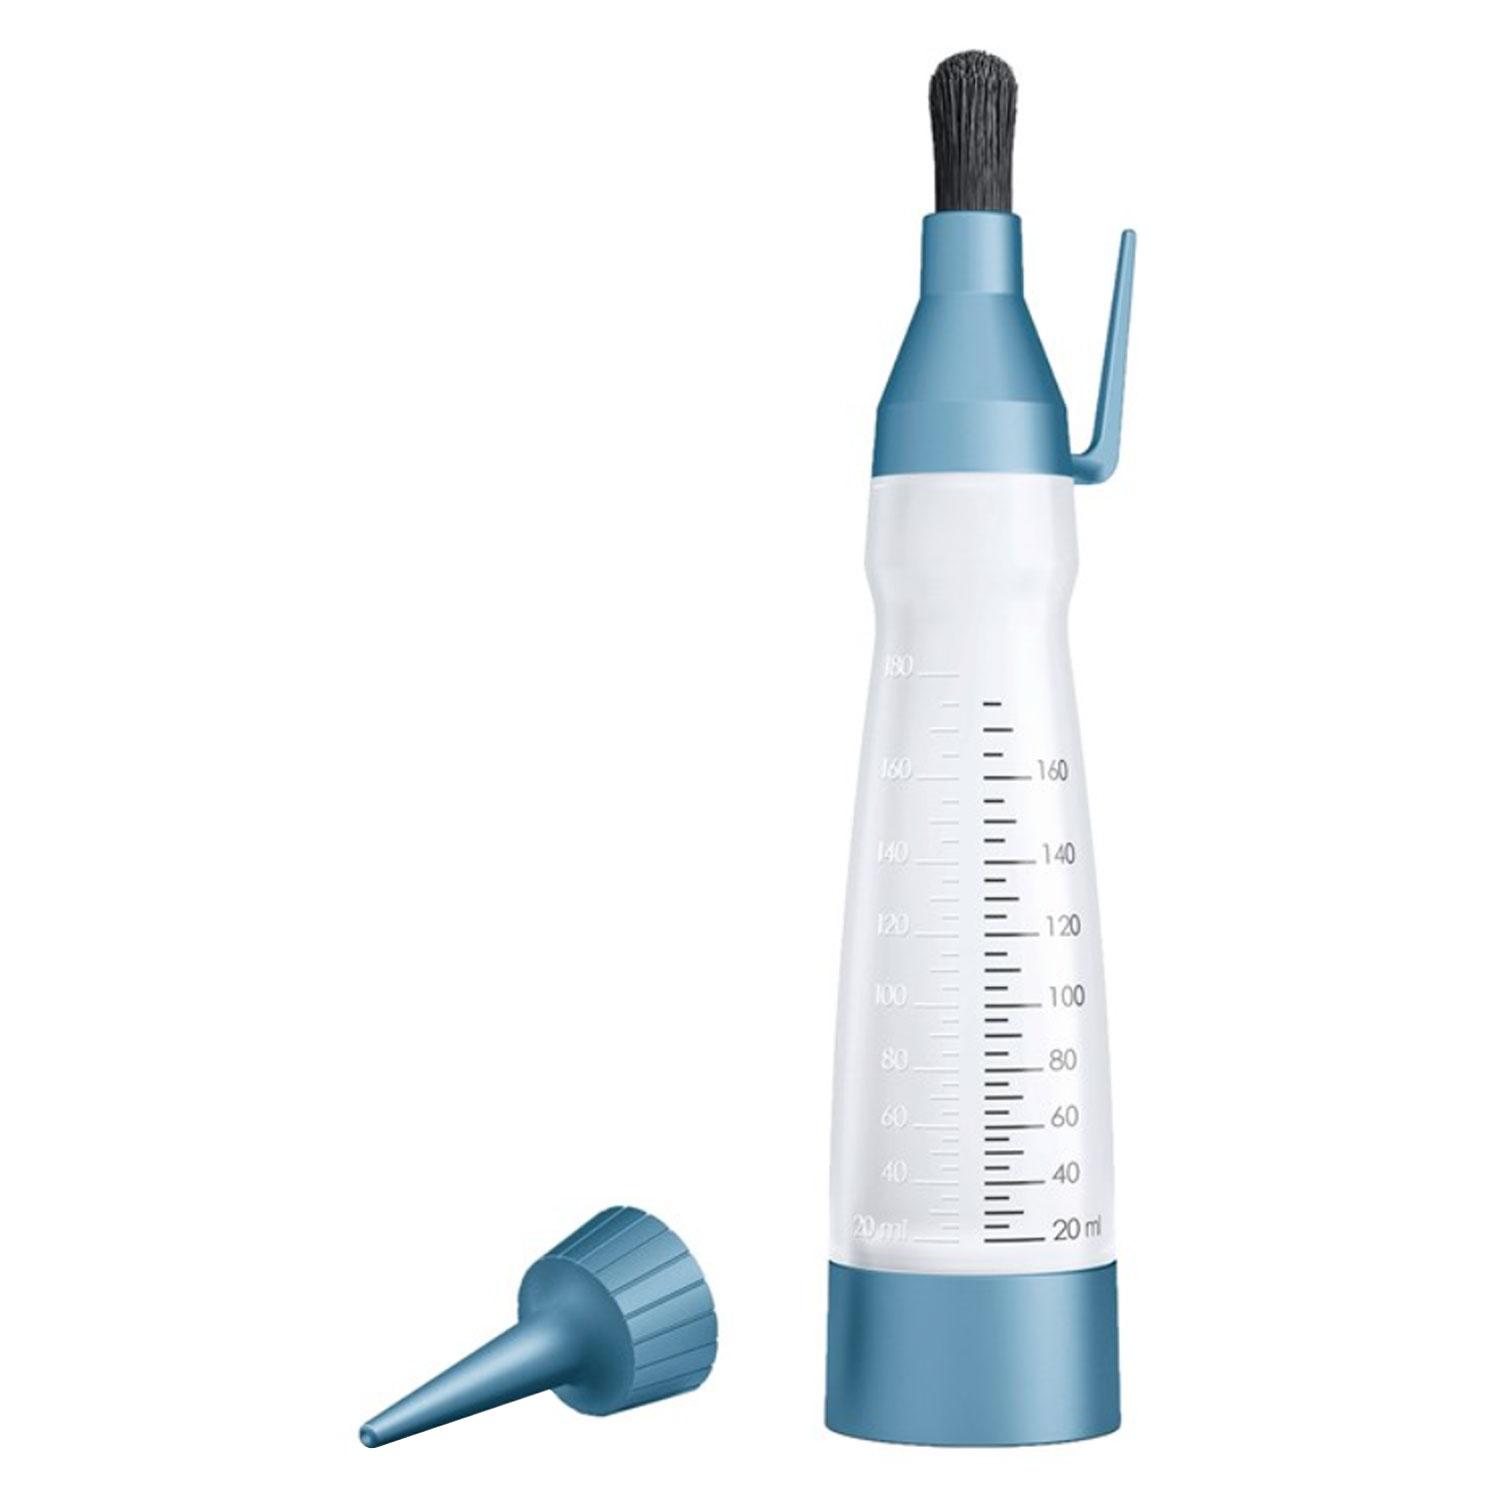 Accessories - Applicator bottle with Brush